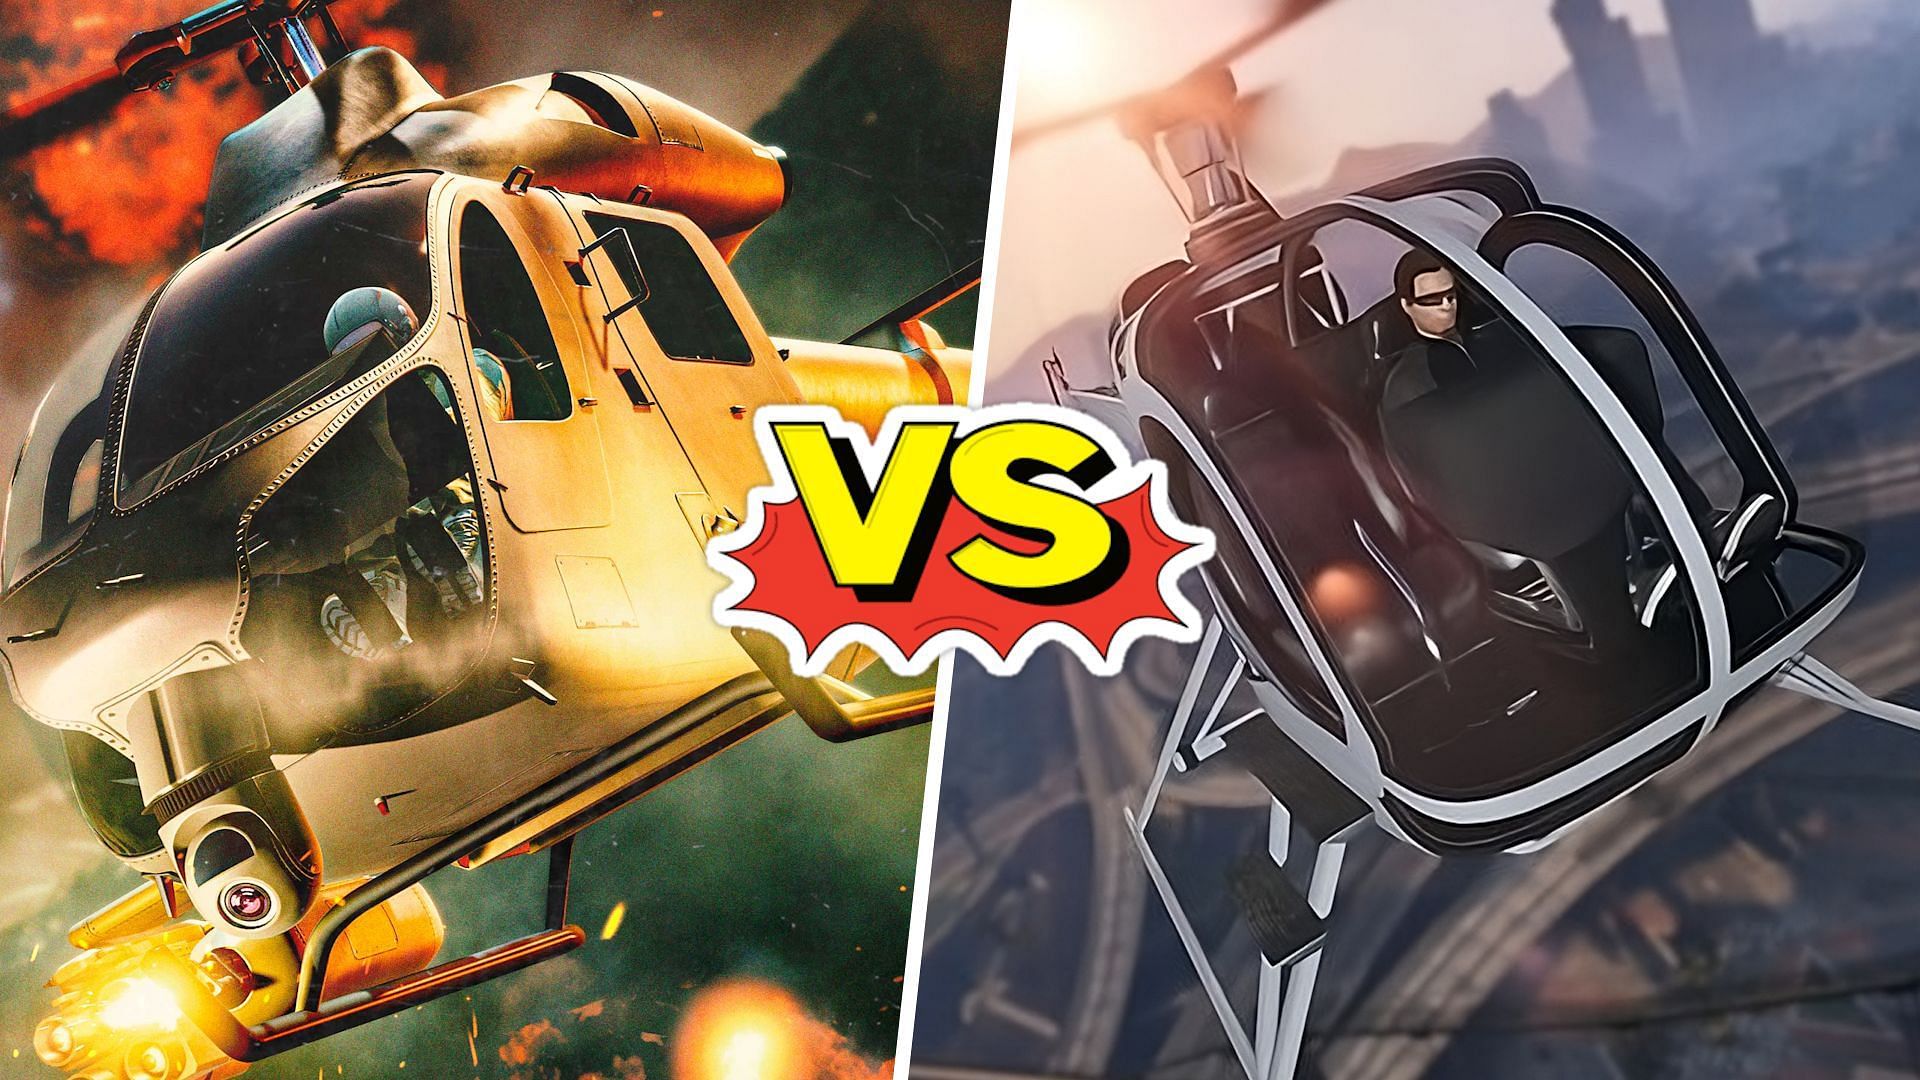 The chopper on the left is brand-new, while the one on the right is a popular yet cheap option many players use